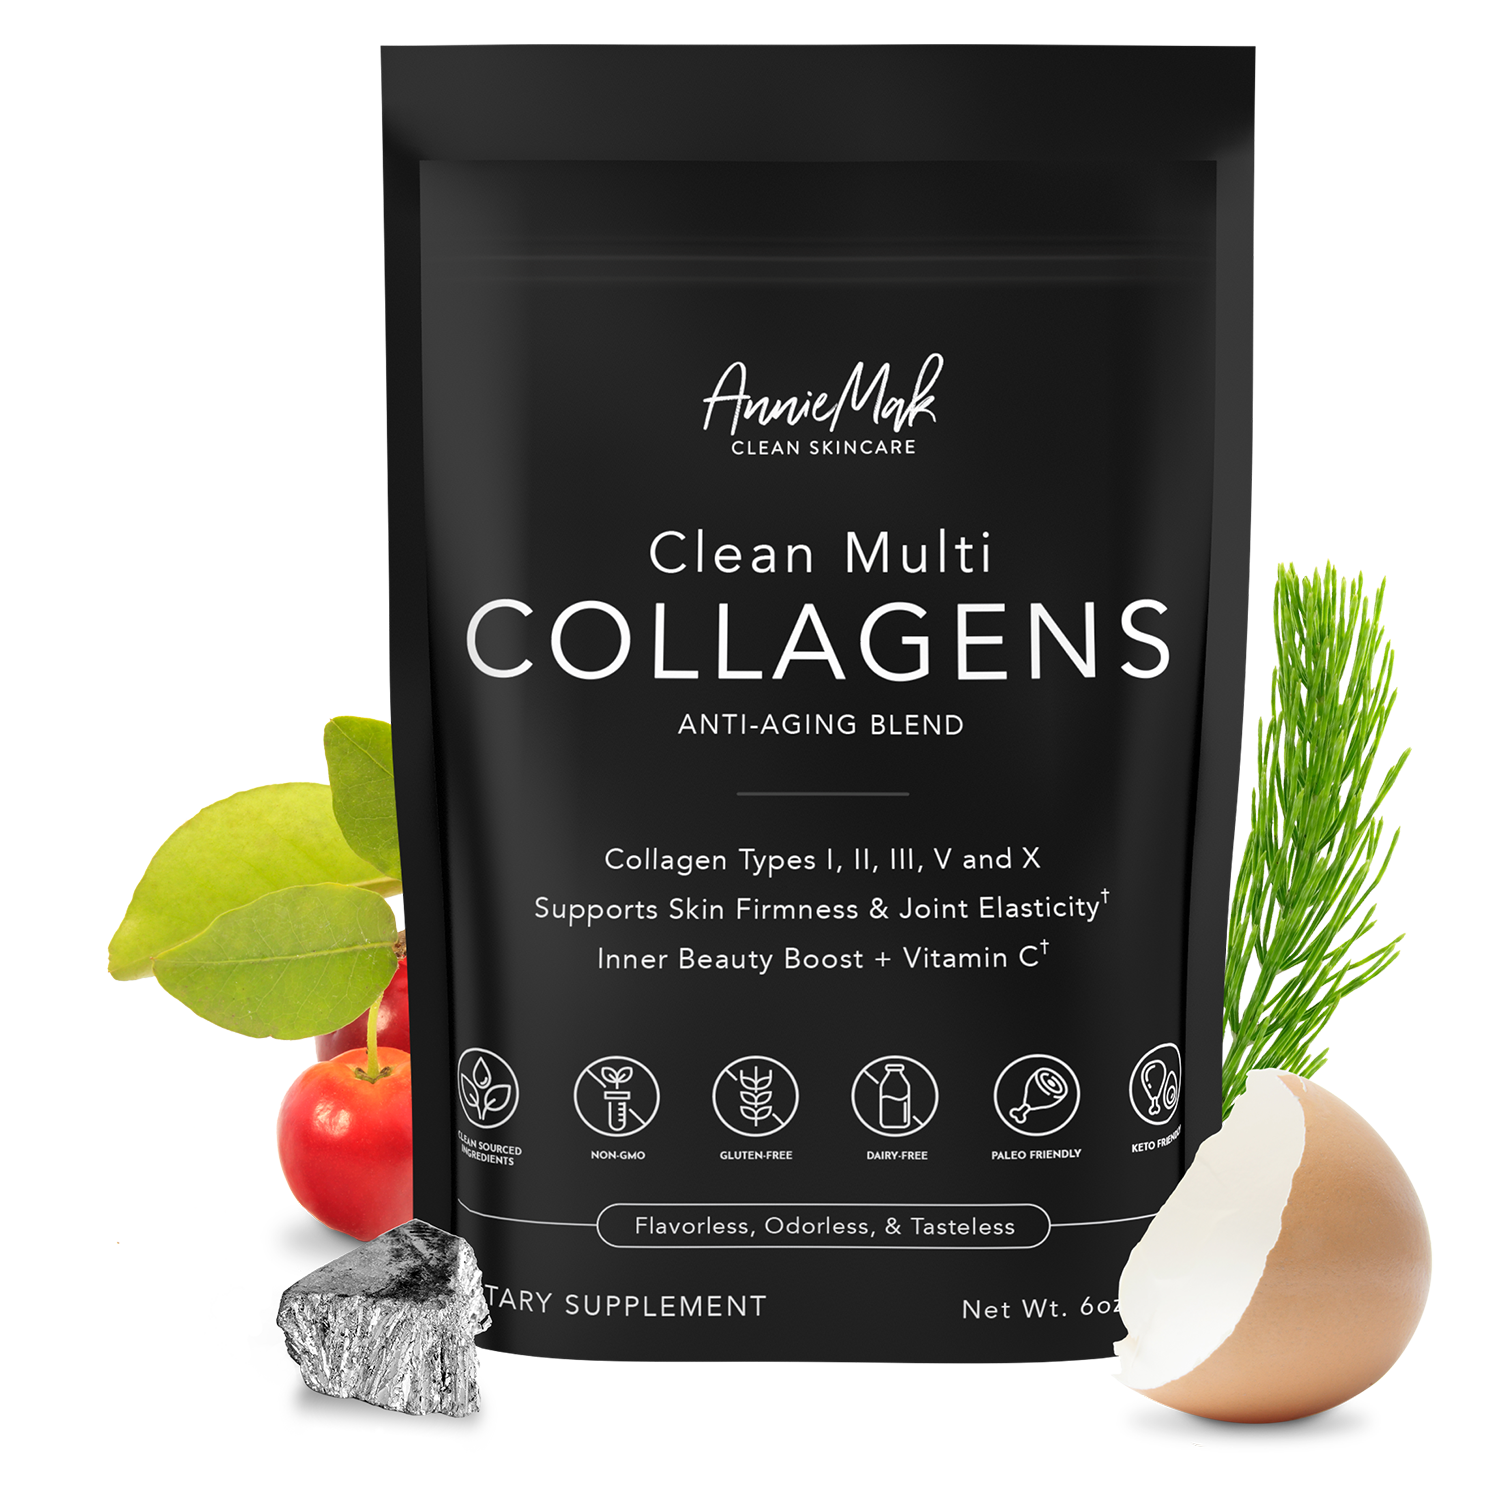 Clean Multi Collagens Collection